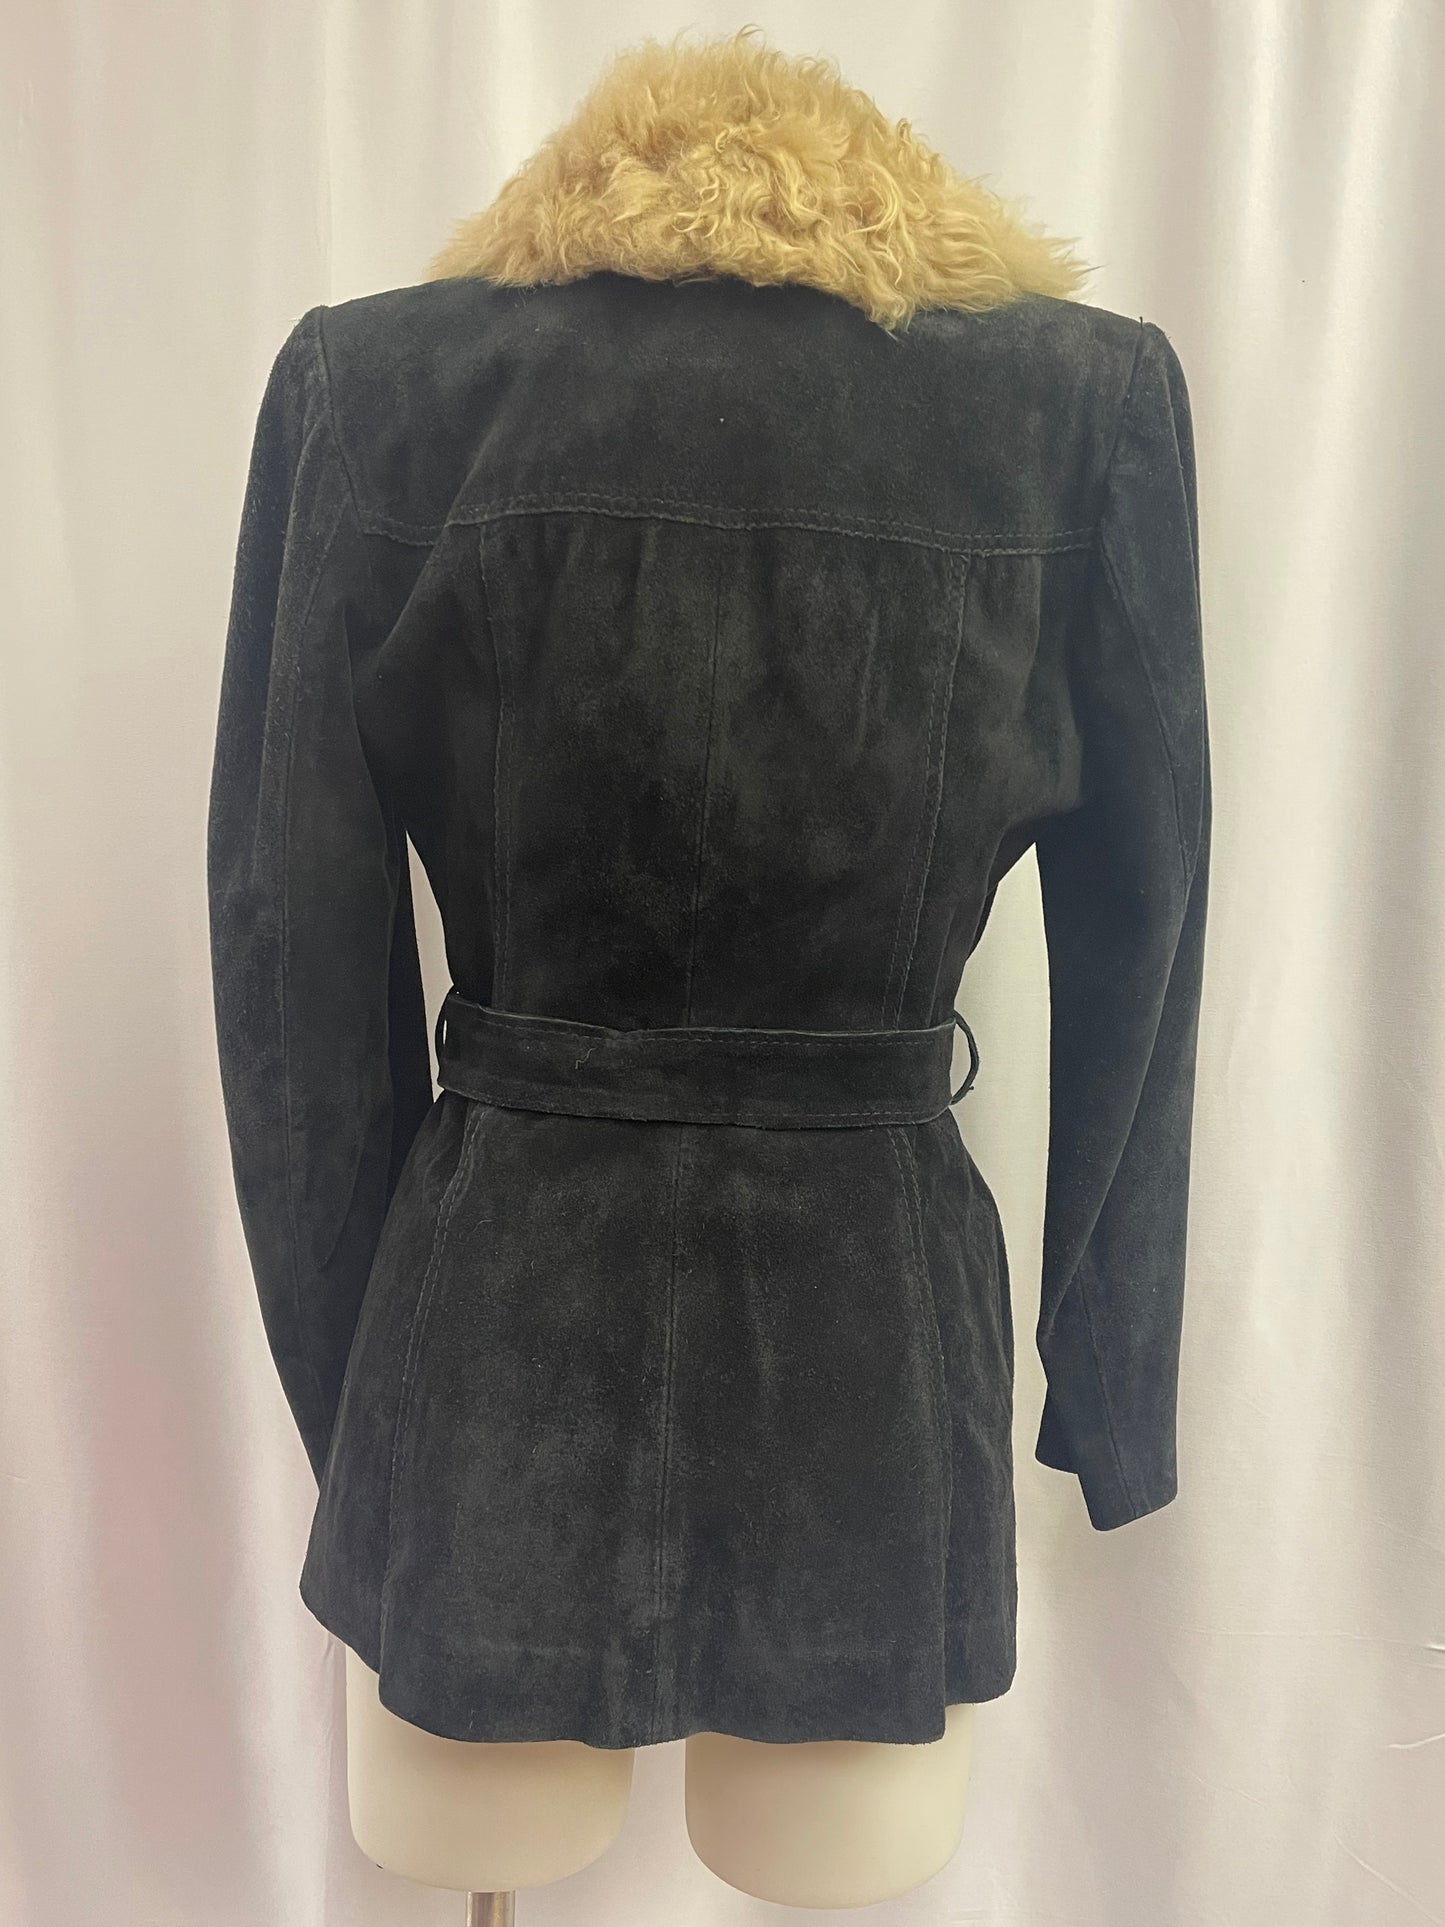 70s Suede Jacket with Faux Fur Collar